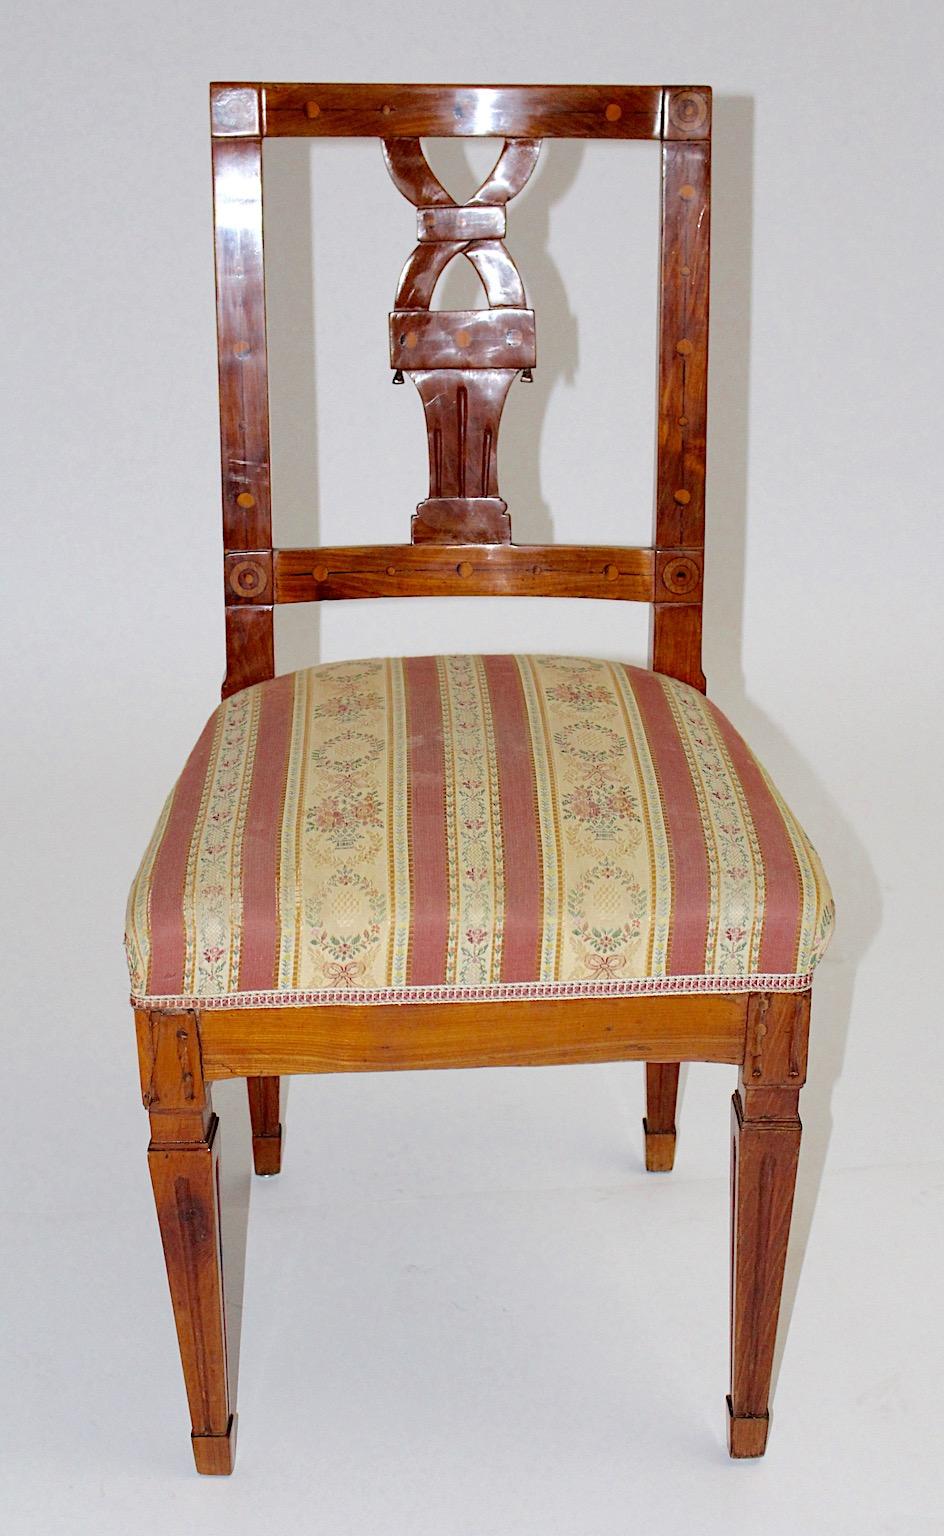 Dining chair or side chair hand carved solid cherrywood with maple inlays circa 1780, Austria. 
The Josephinische Stil was a popular style in Austria in the 18th century.
This style marked the end of Habsburgerbarock and corresponded to the start